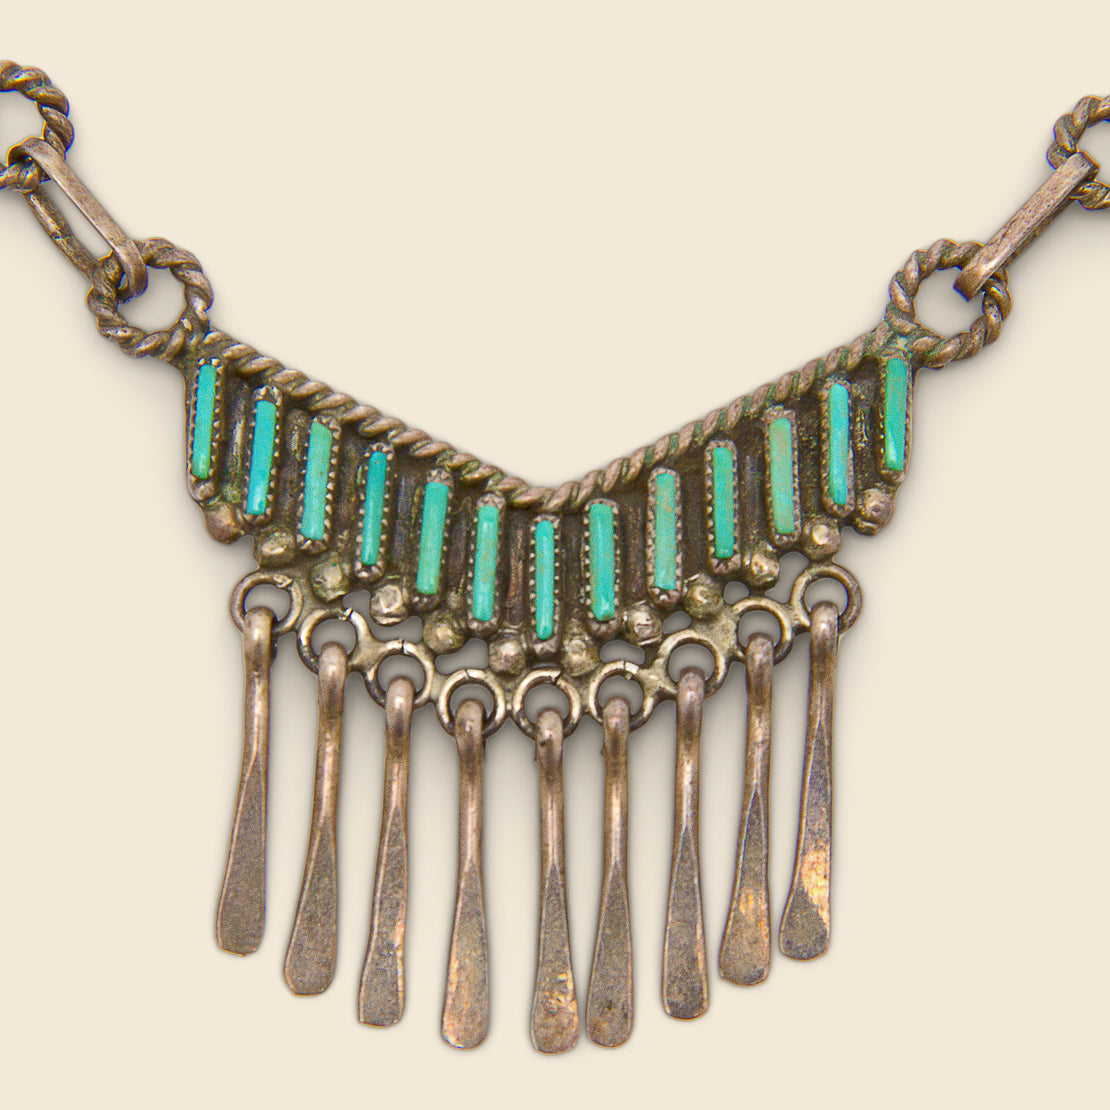 Pieced Necklace - Silver & Turquoise